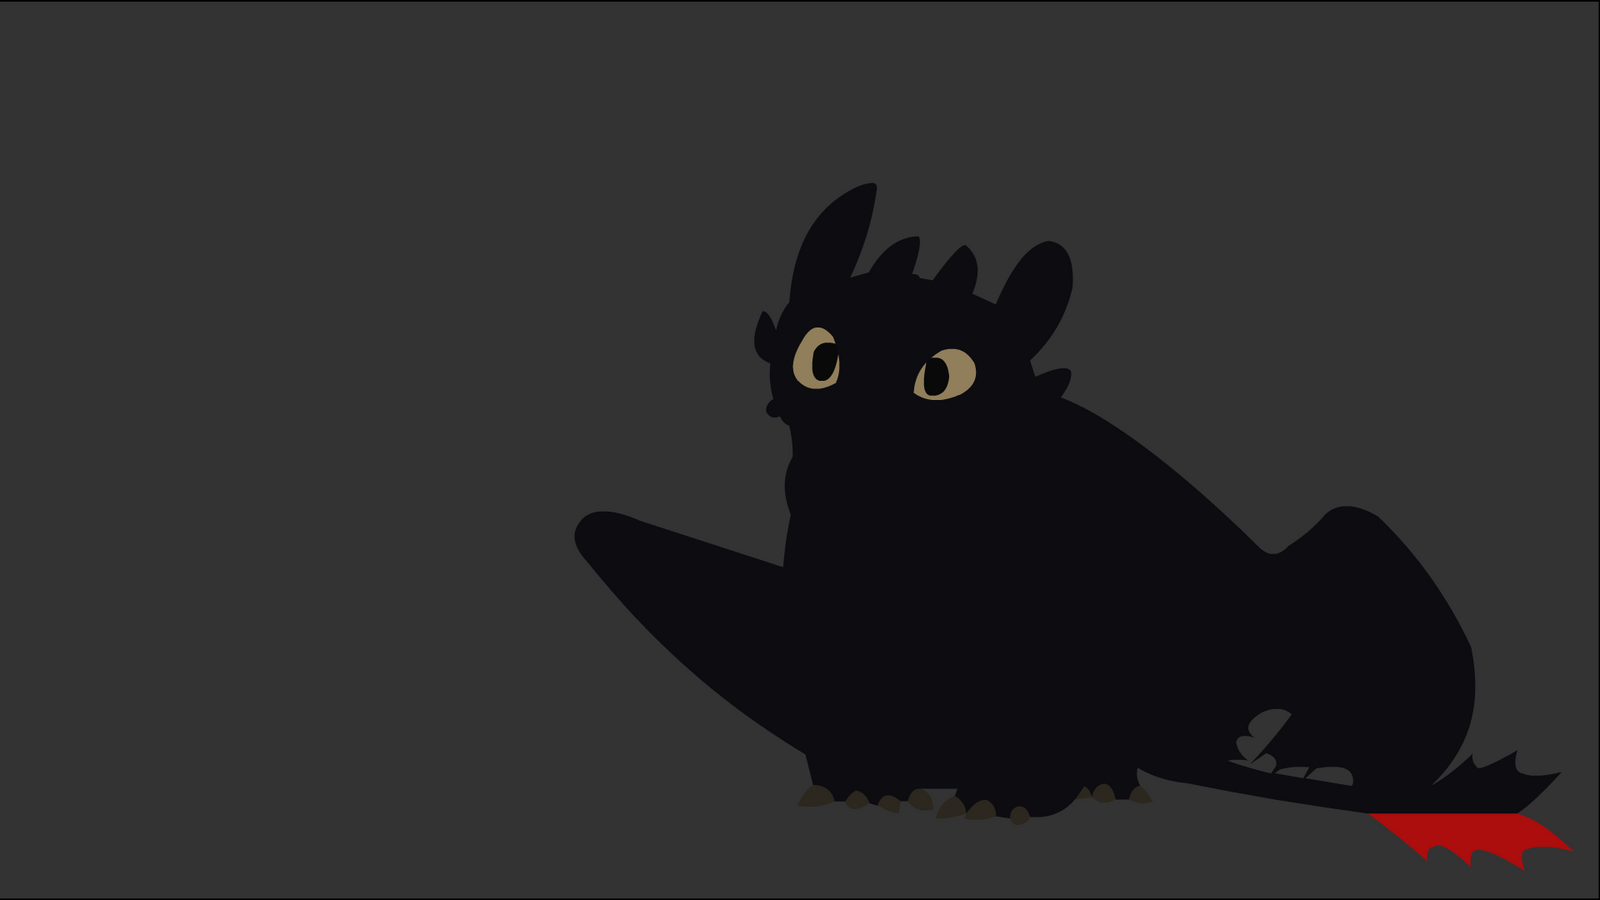 Toothless by dragonitearmy on DeviantArt